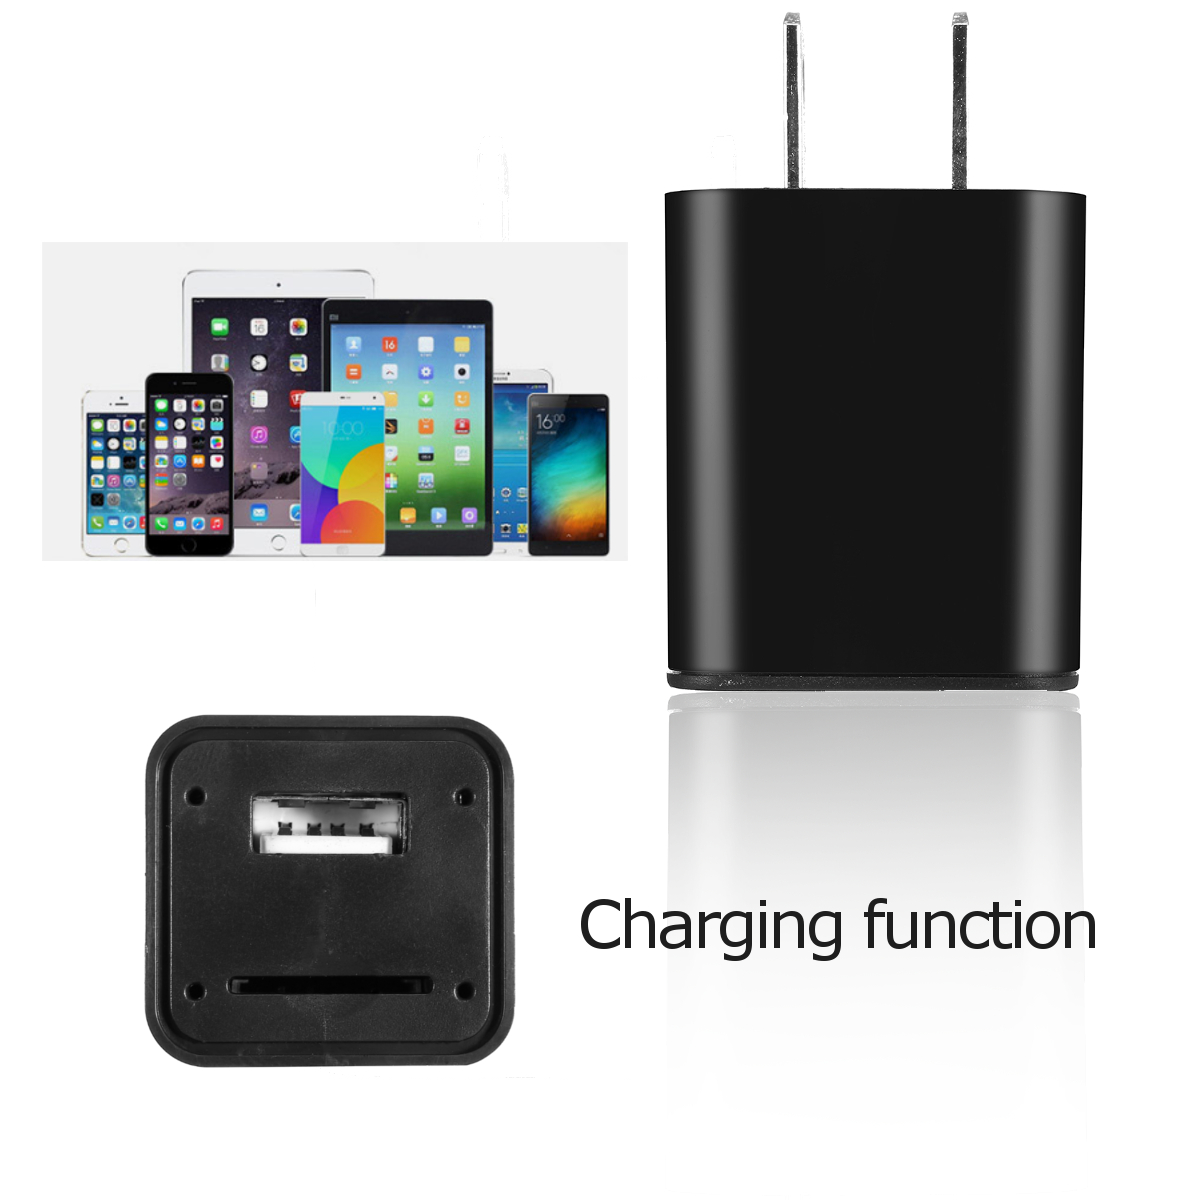 Voice Activated Wall Charger GSM GPS SIM Tracker Audio Ear Bug Listening Device